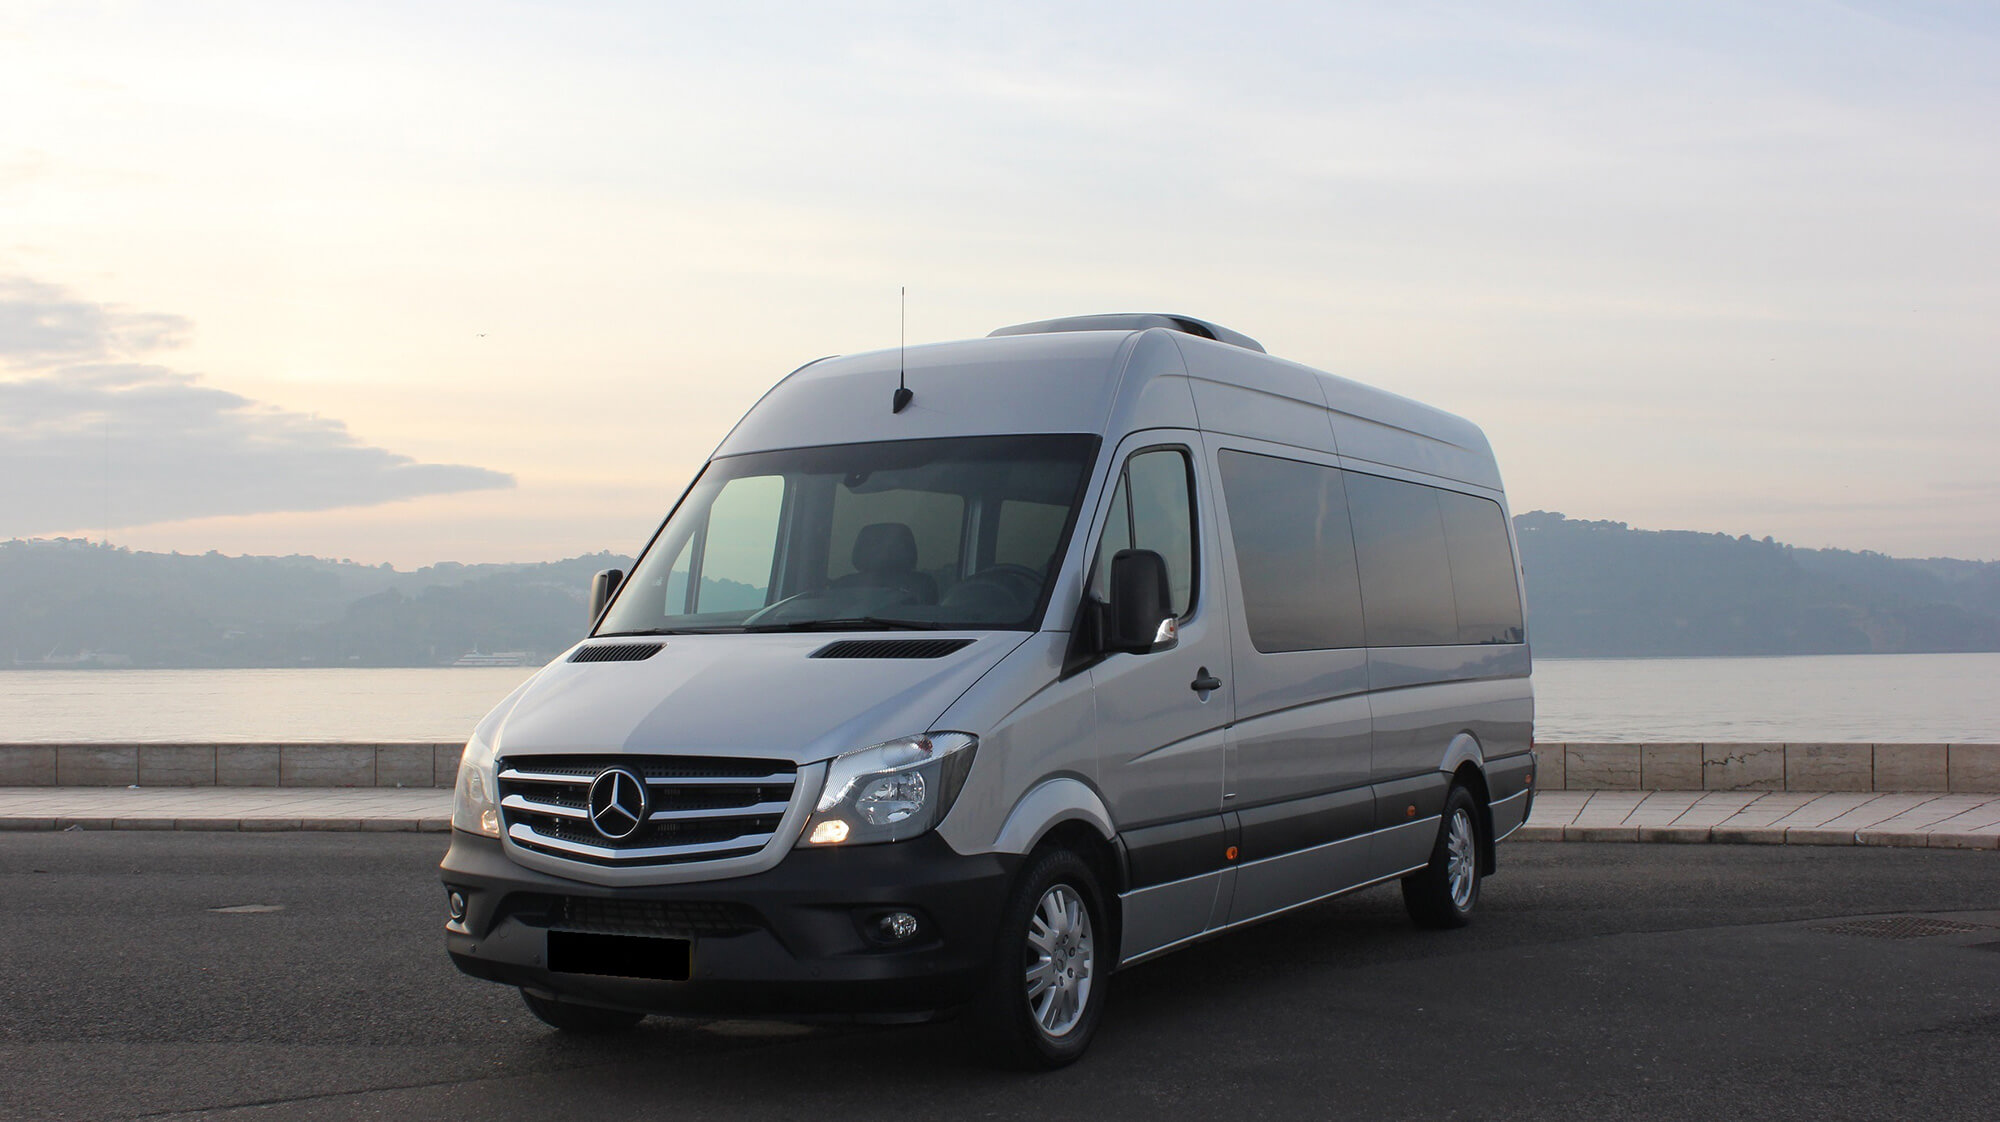 Hire a 8 seater Microbus (Mercedes Sprinter 2016) from SPECIALIMO TRAVEL GROUP in Almargem do Bispo, Sintra 